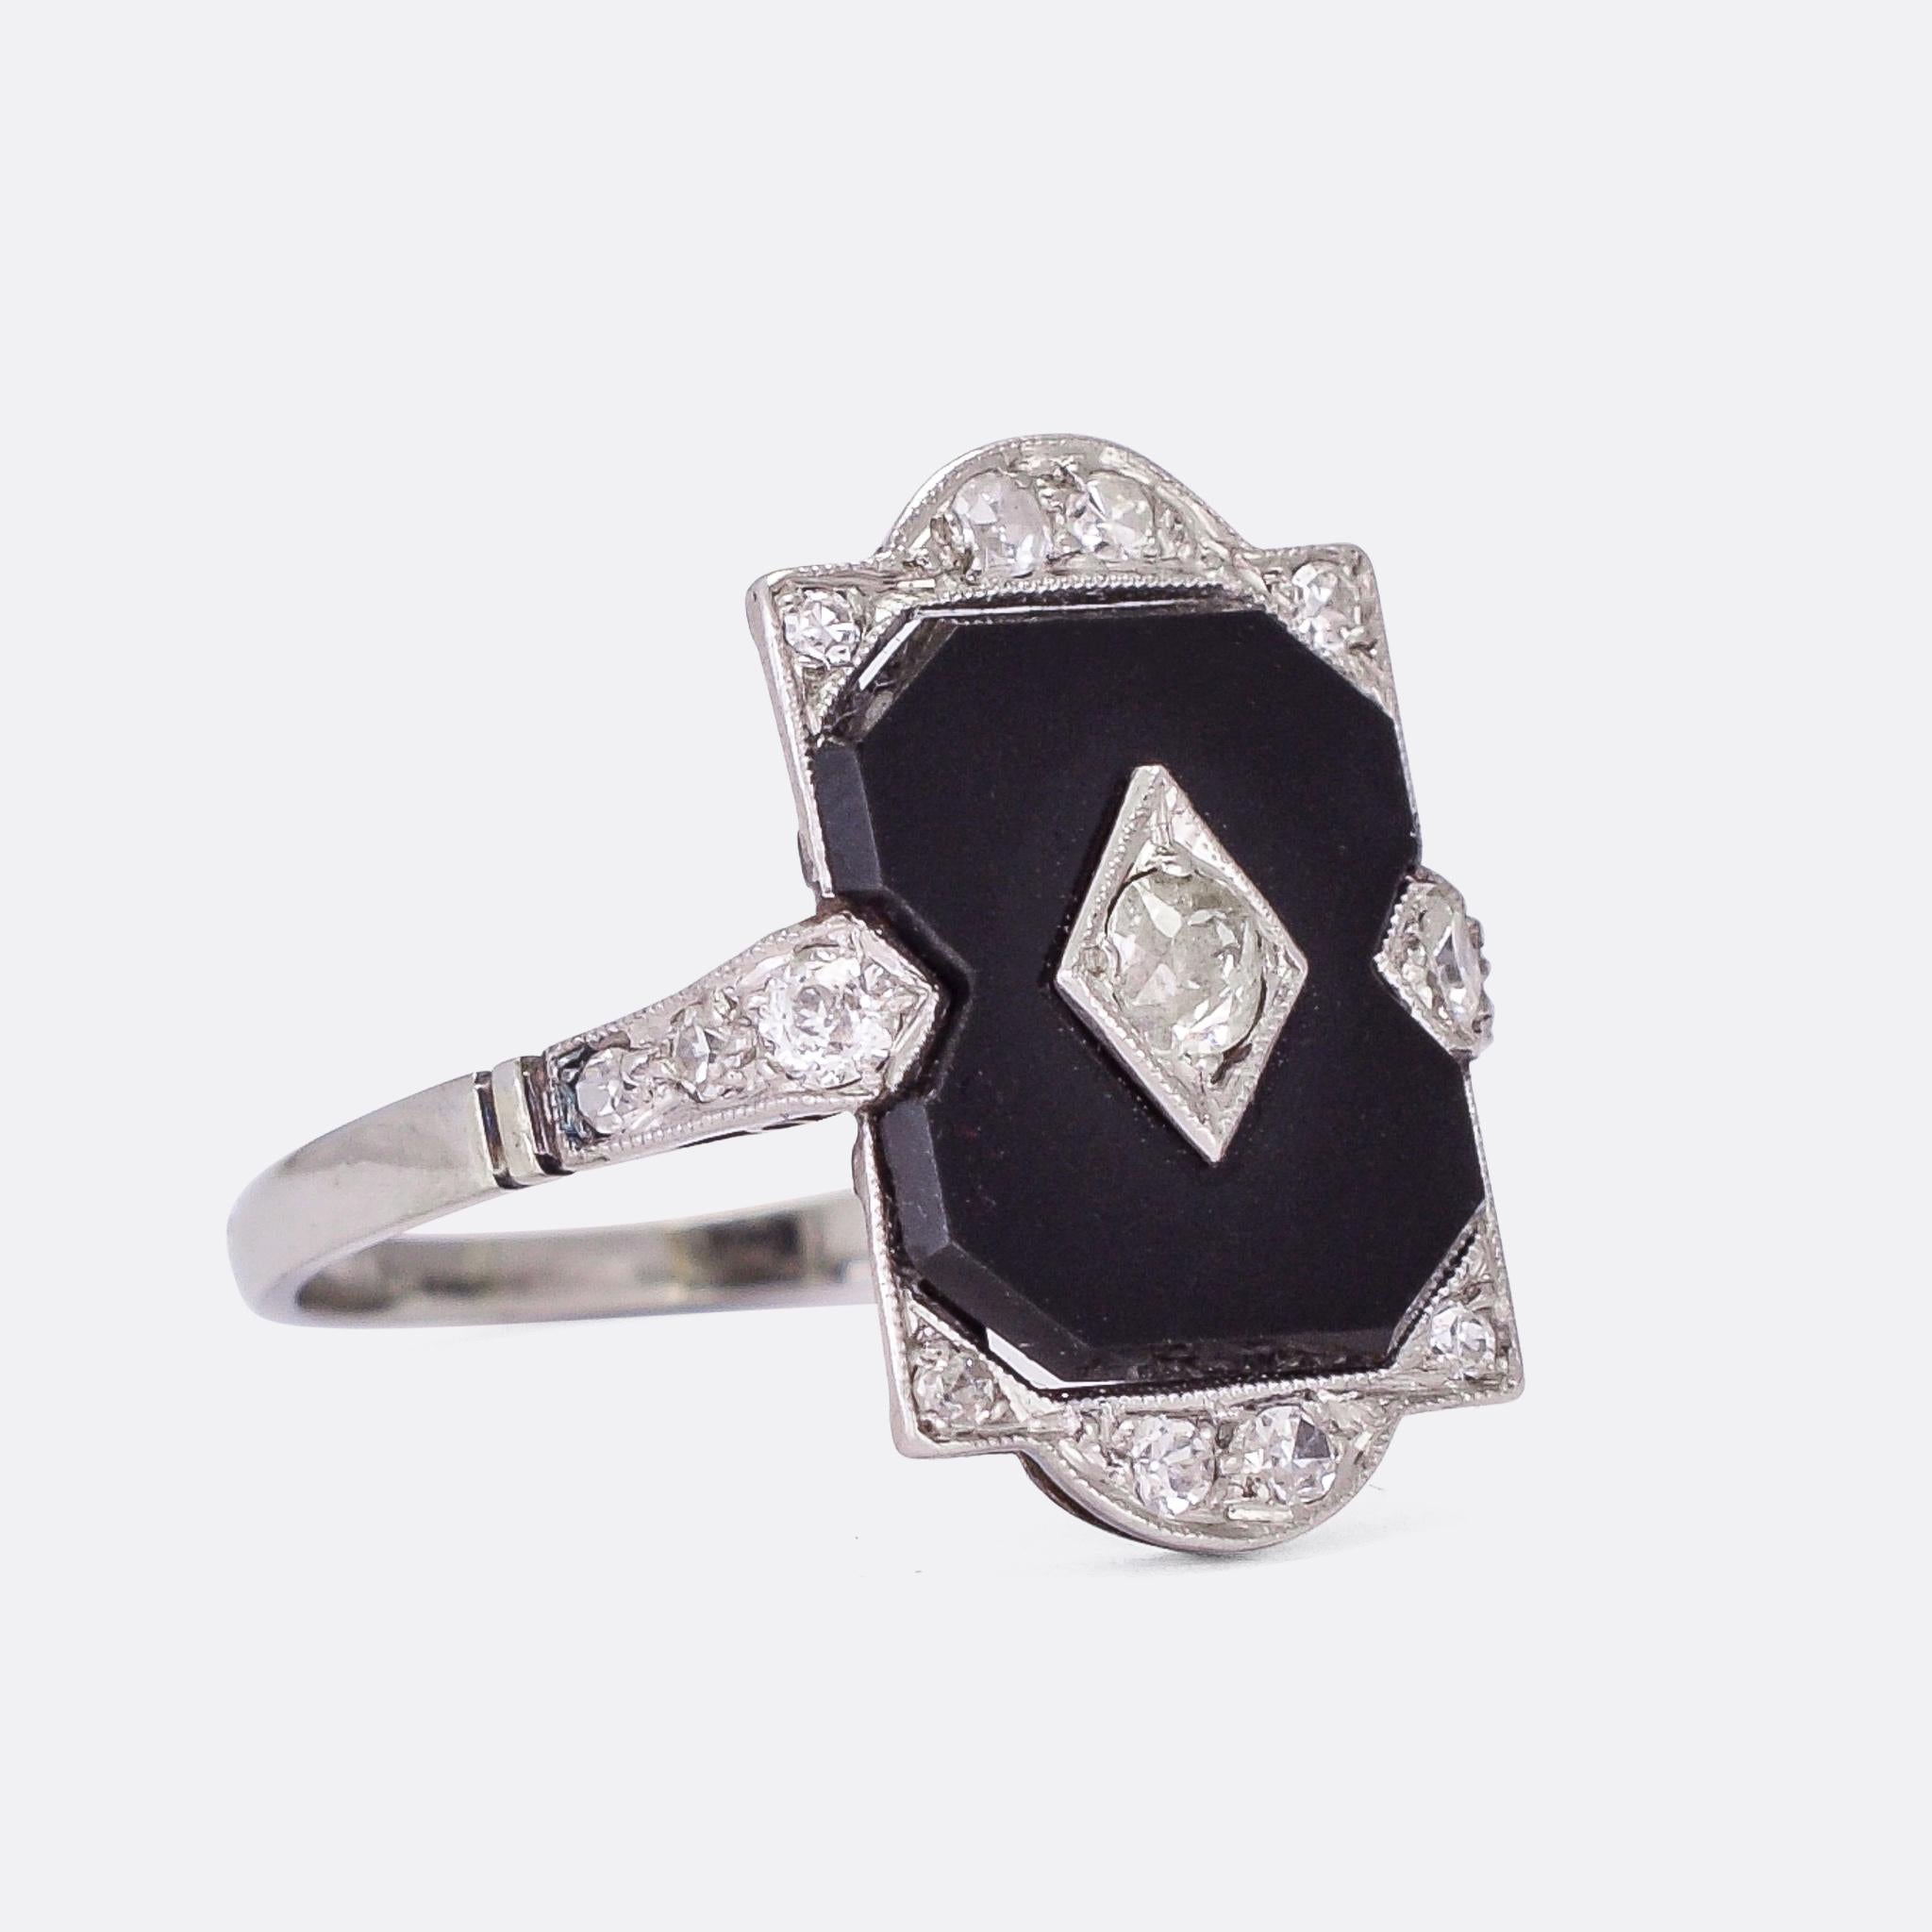 A stunning Edwardian era onyx & diamond panel ring crafted in platinum throughout. The deep black panel creates a bold contrast with the icy white diamonds and the millegrain platinum settings. It's handmade and dates from the early 20th Century,